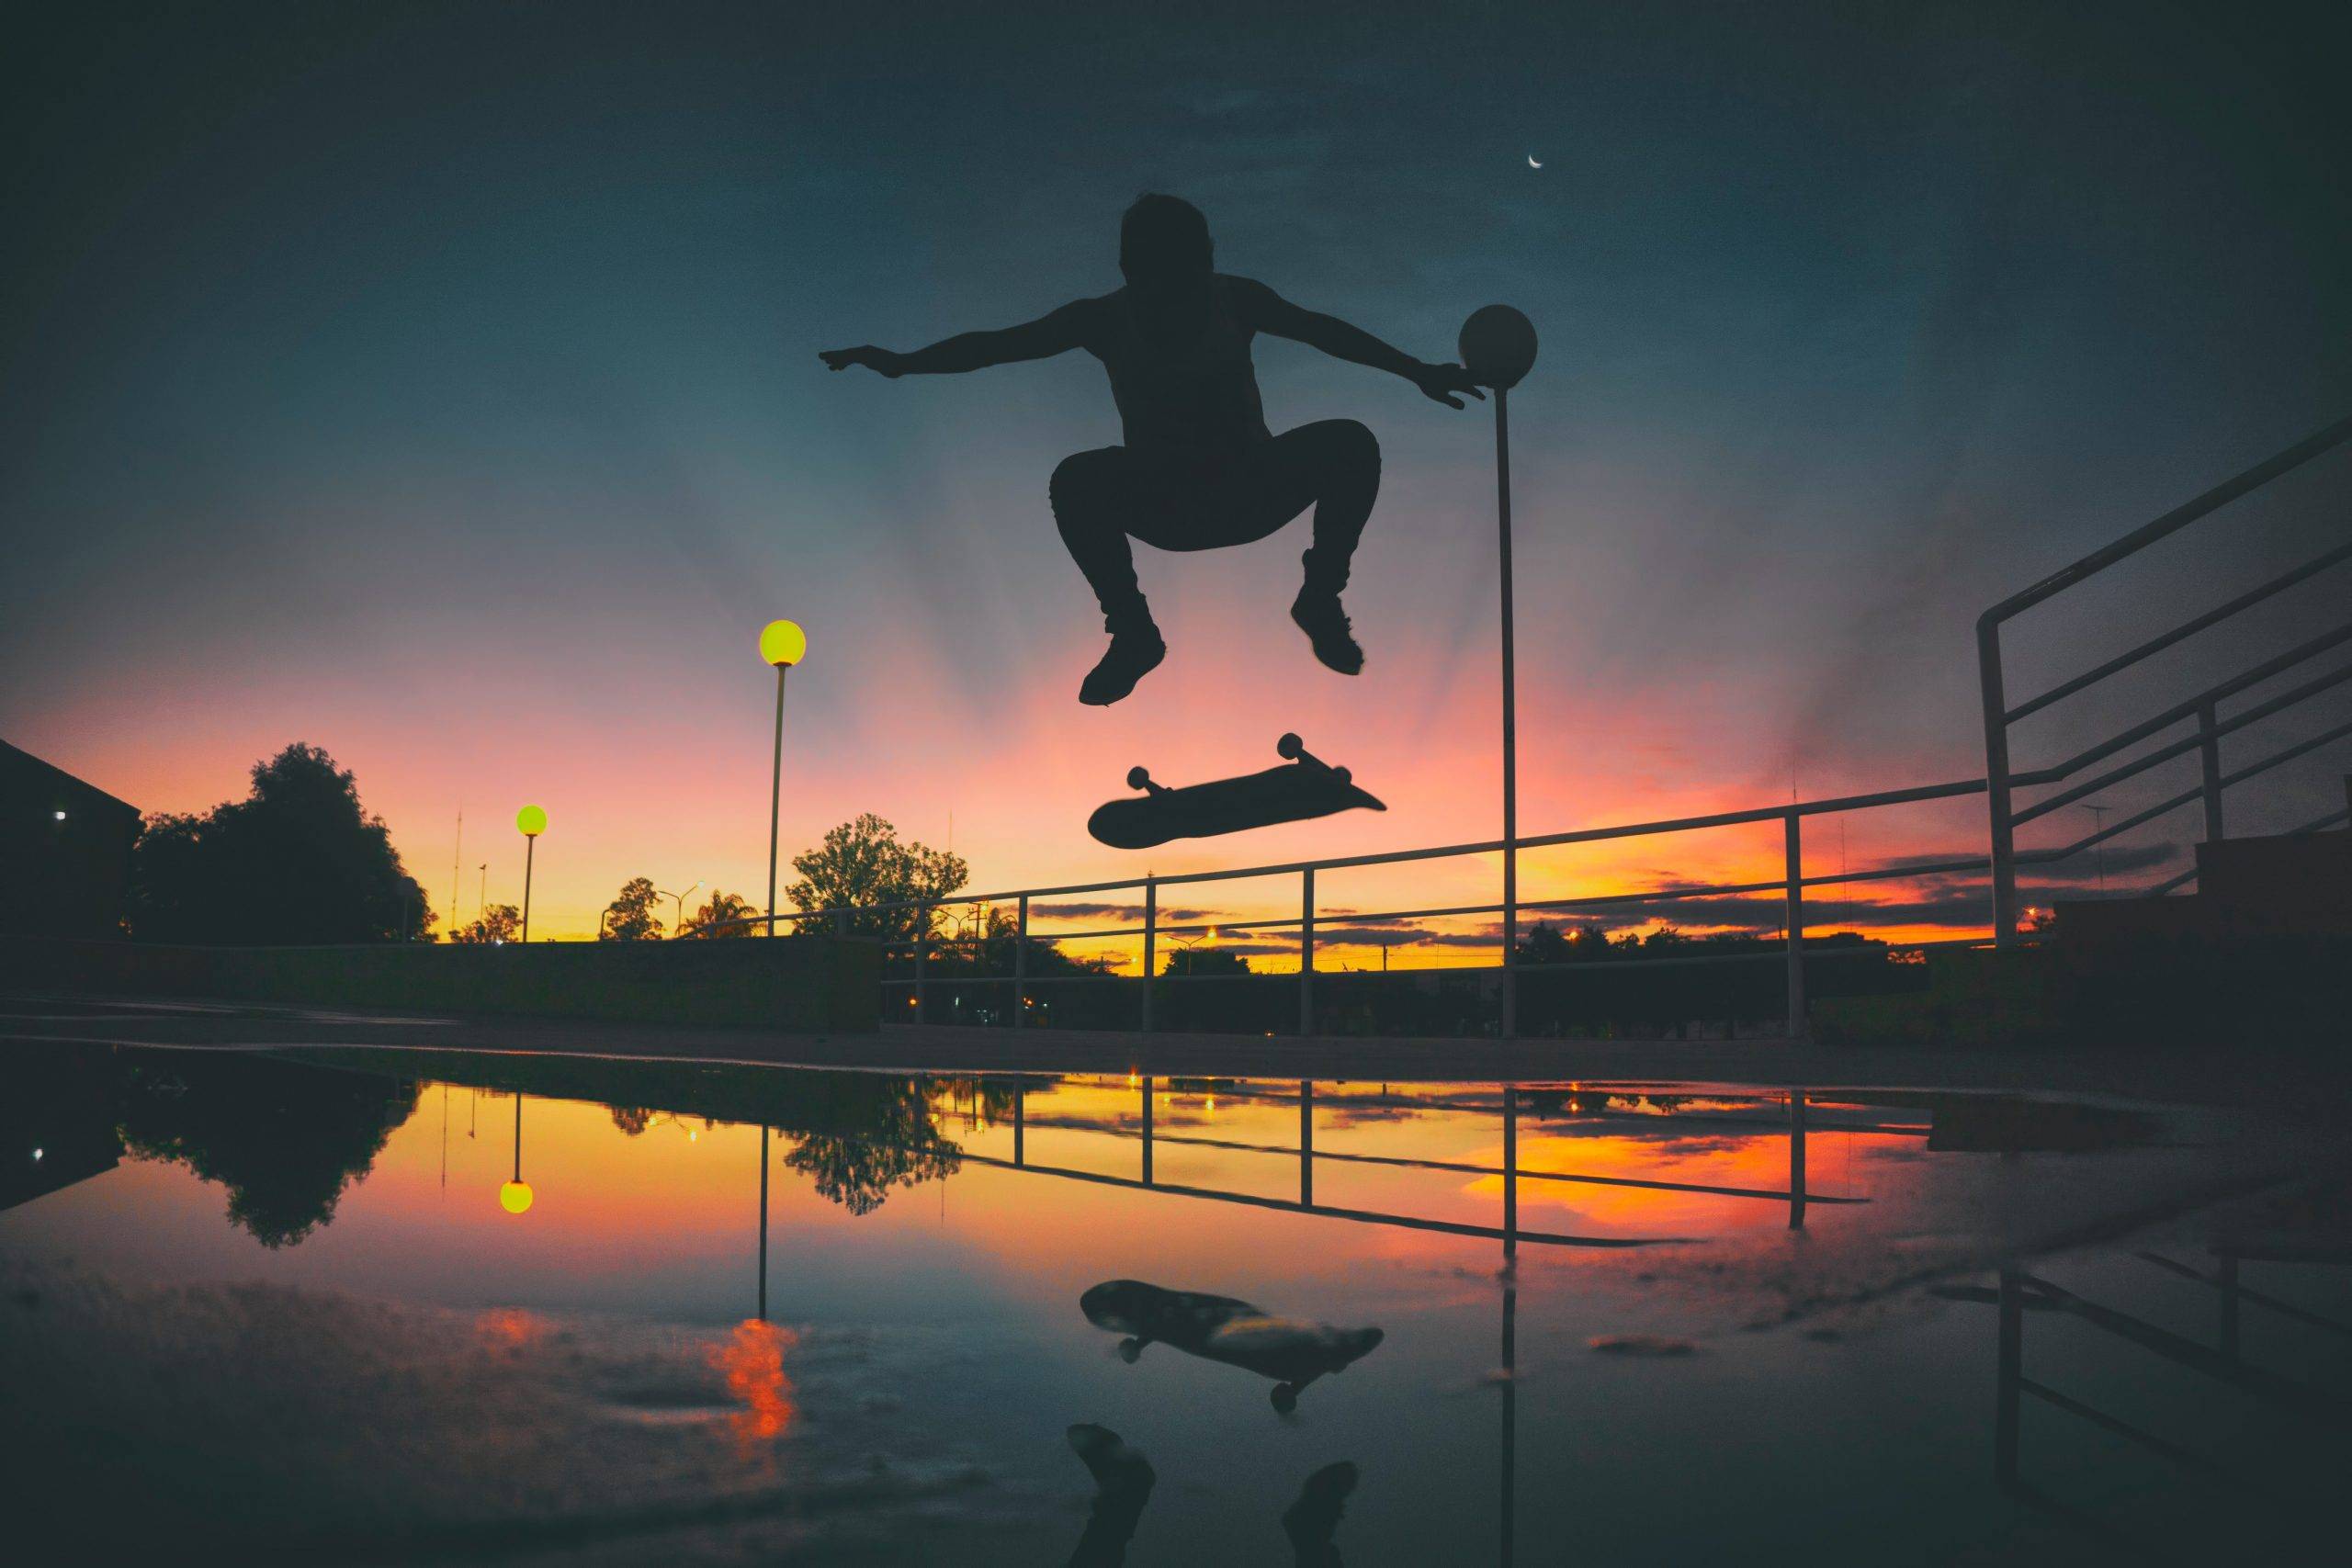 Stop Being Afraid of Change and Uncertainty - man skateboarding at sunset